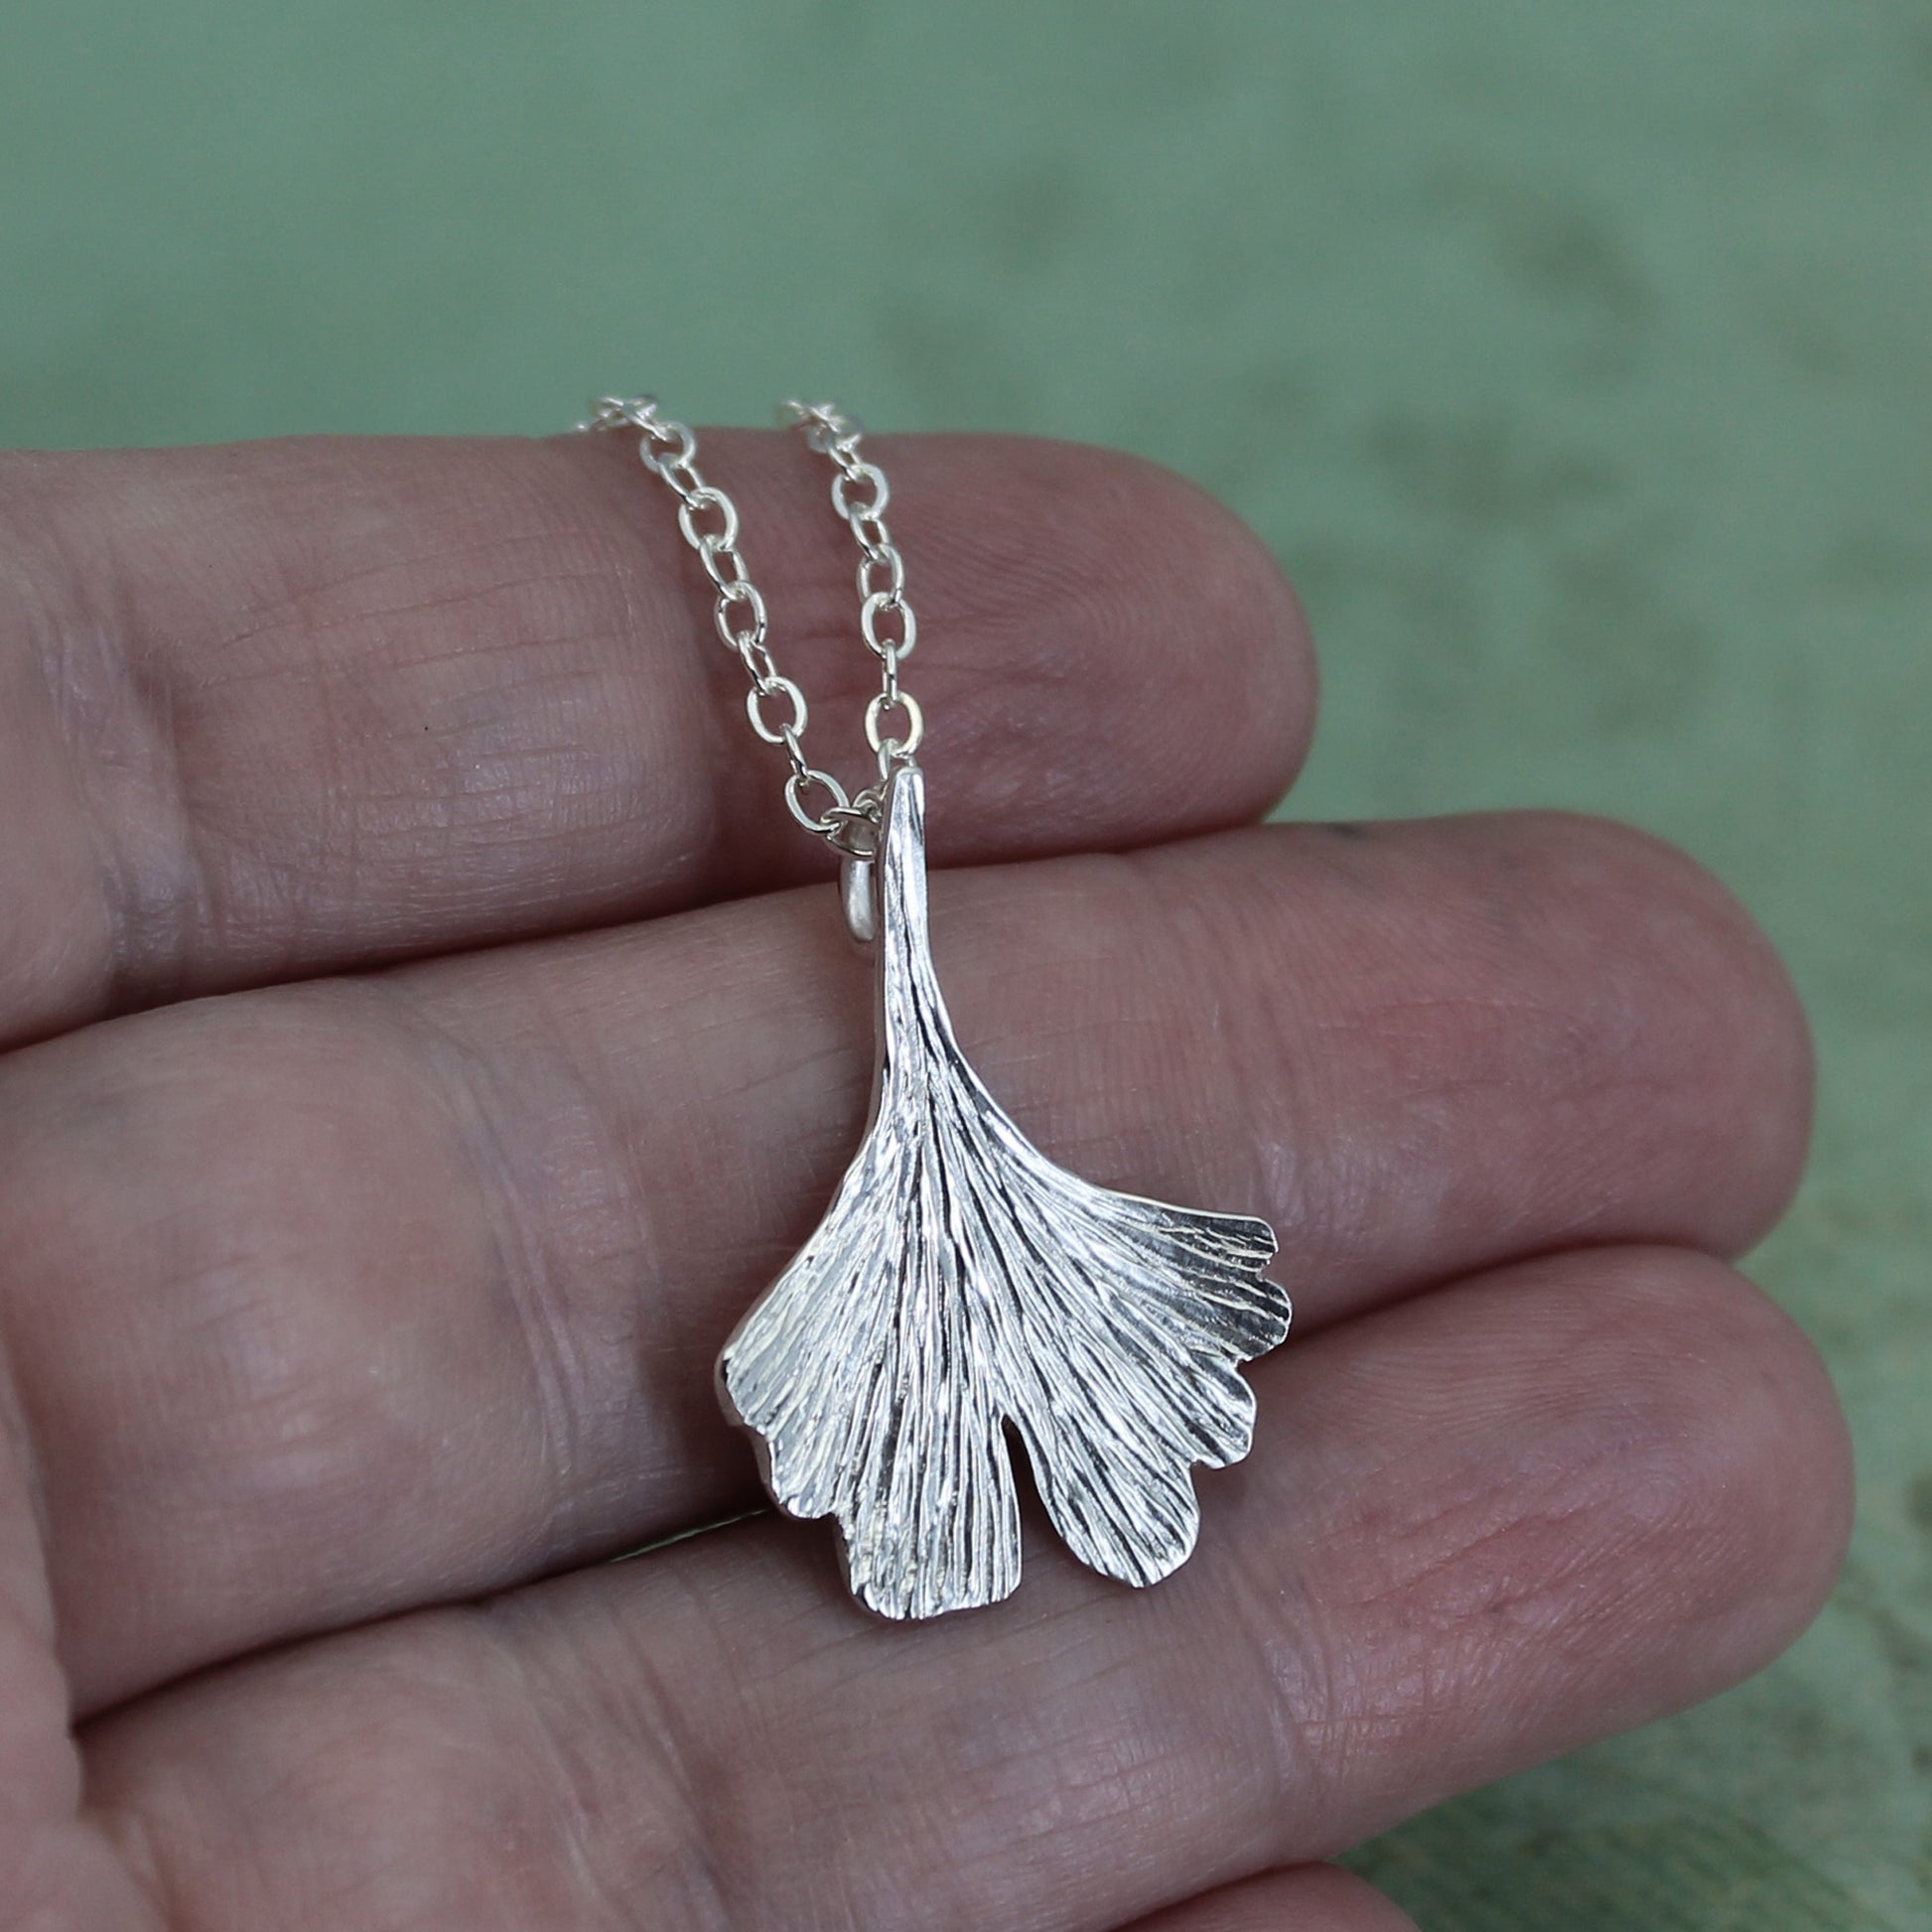 Ginkgo leaf necklace on hand